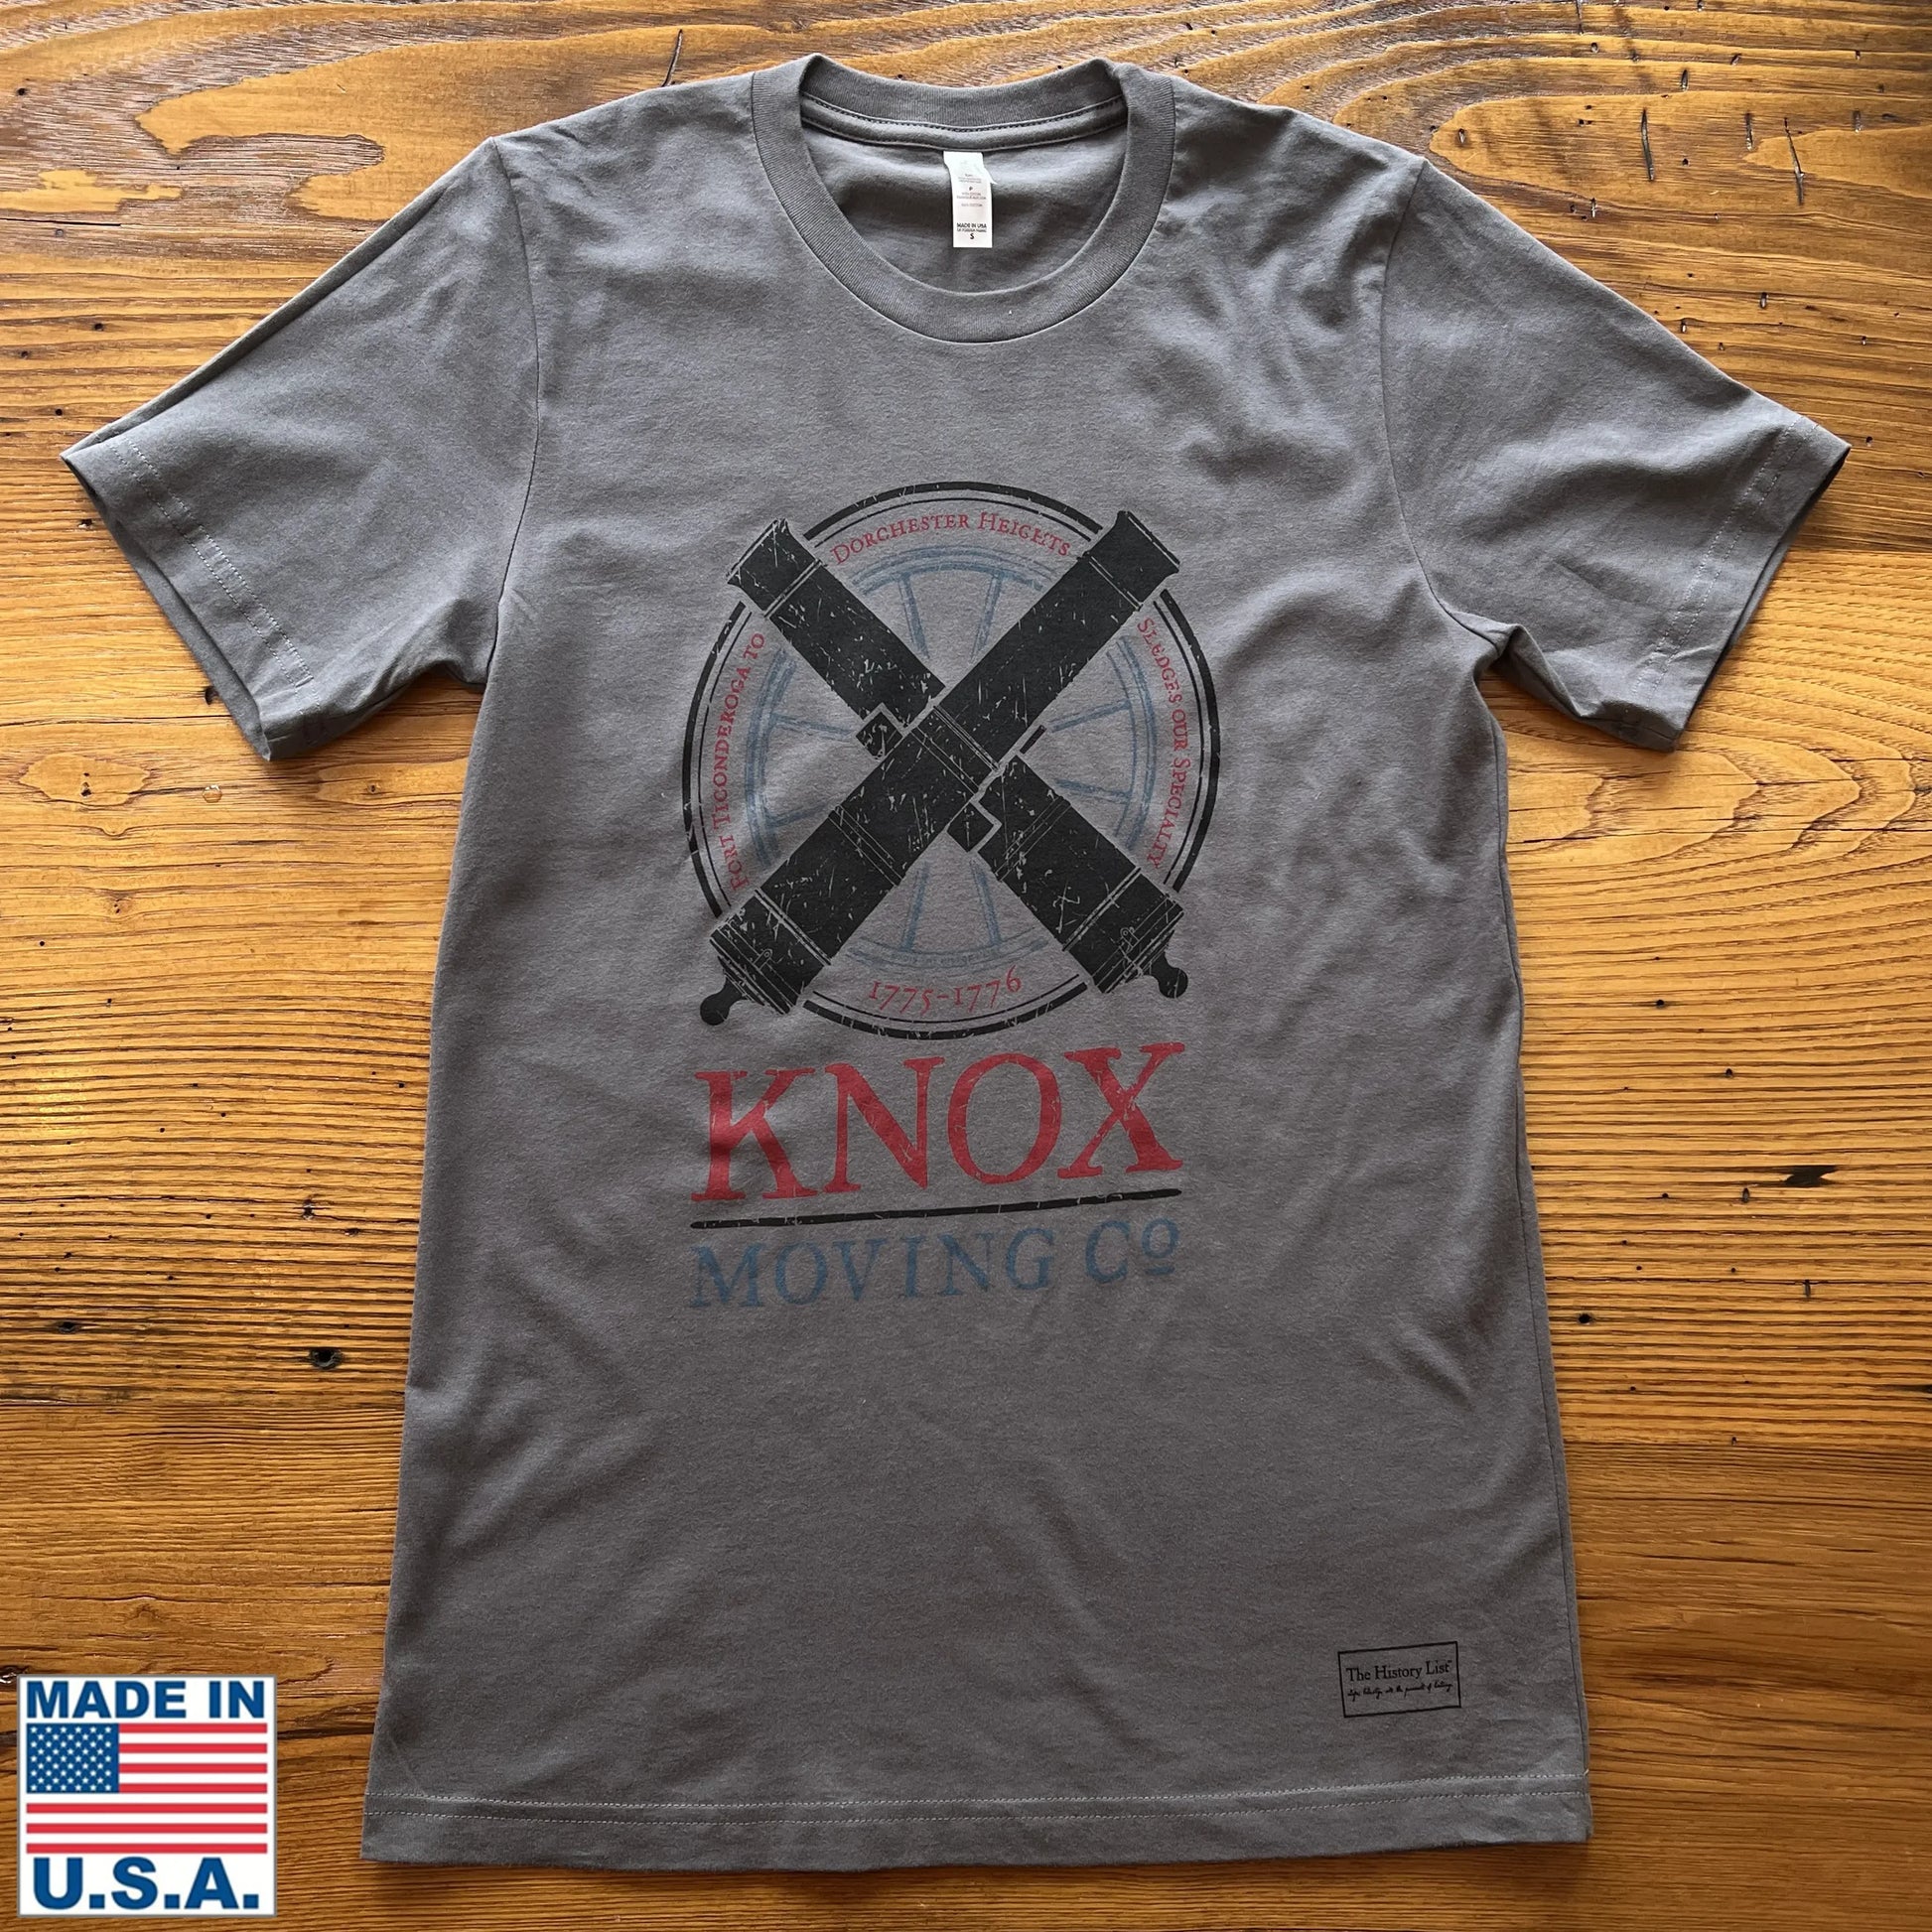 Made in USA "Knox Moving Co." Shirt in Grey from The History List store